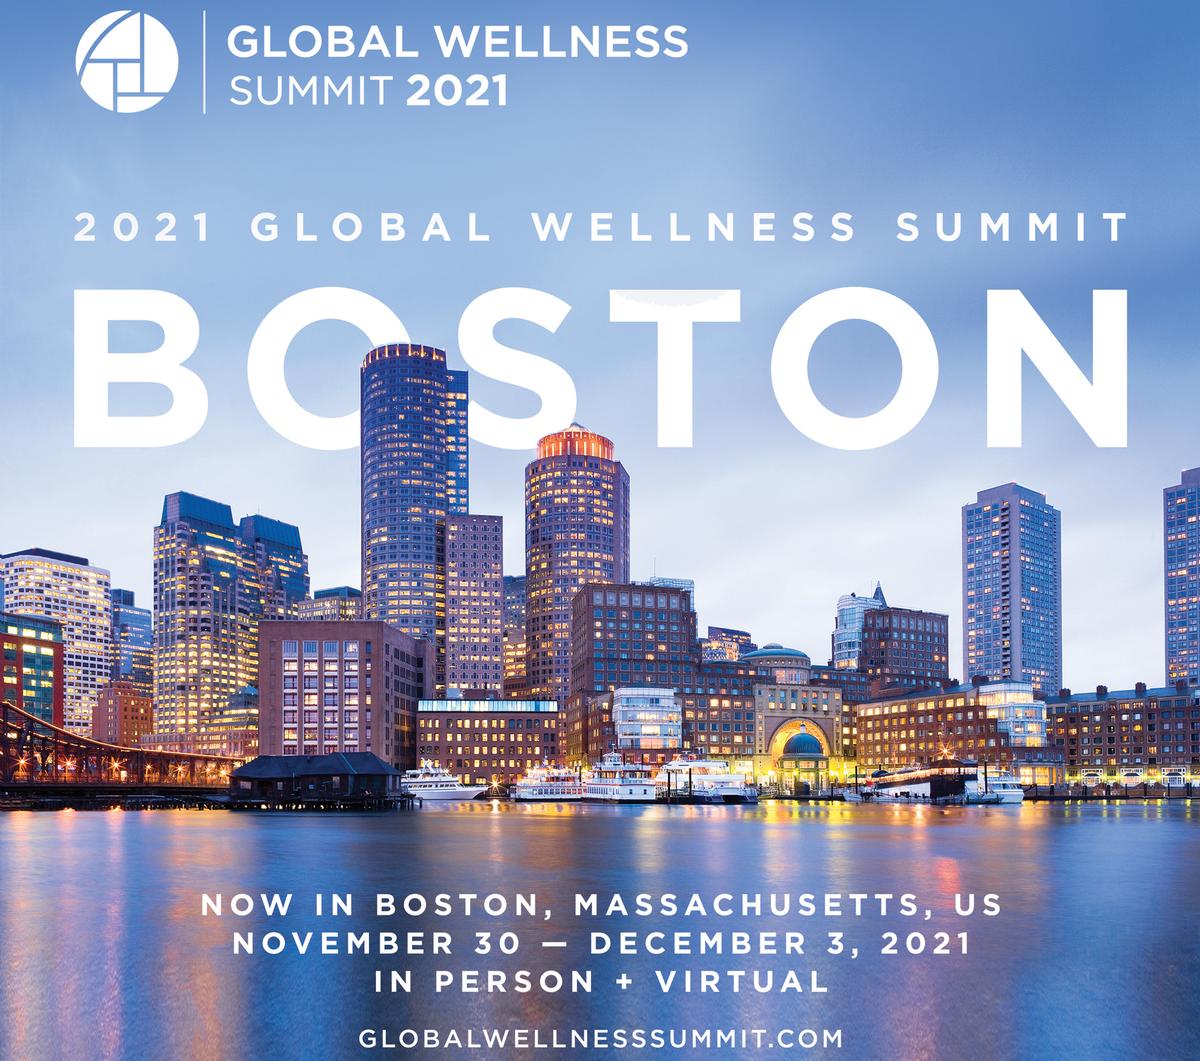 The GWS will take place in Boston, Massachusetts, from 30 November till 3 December 2021 